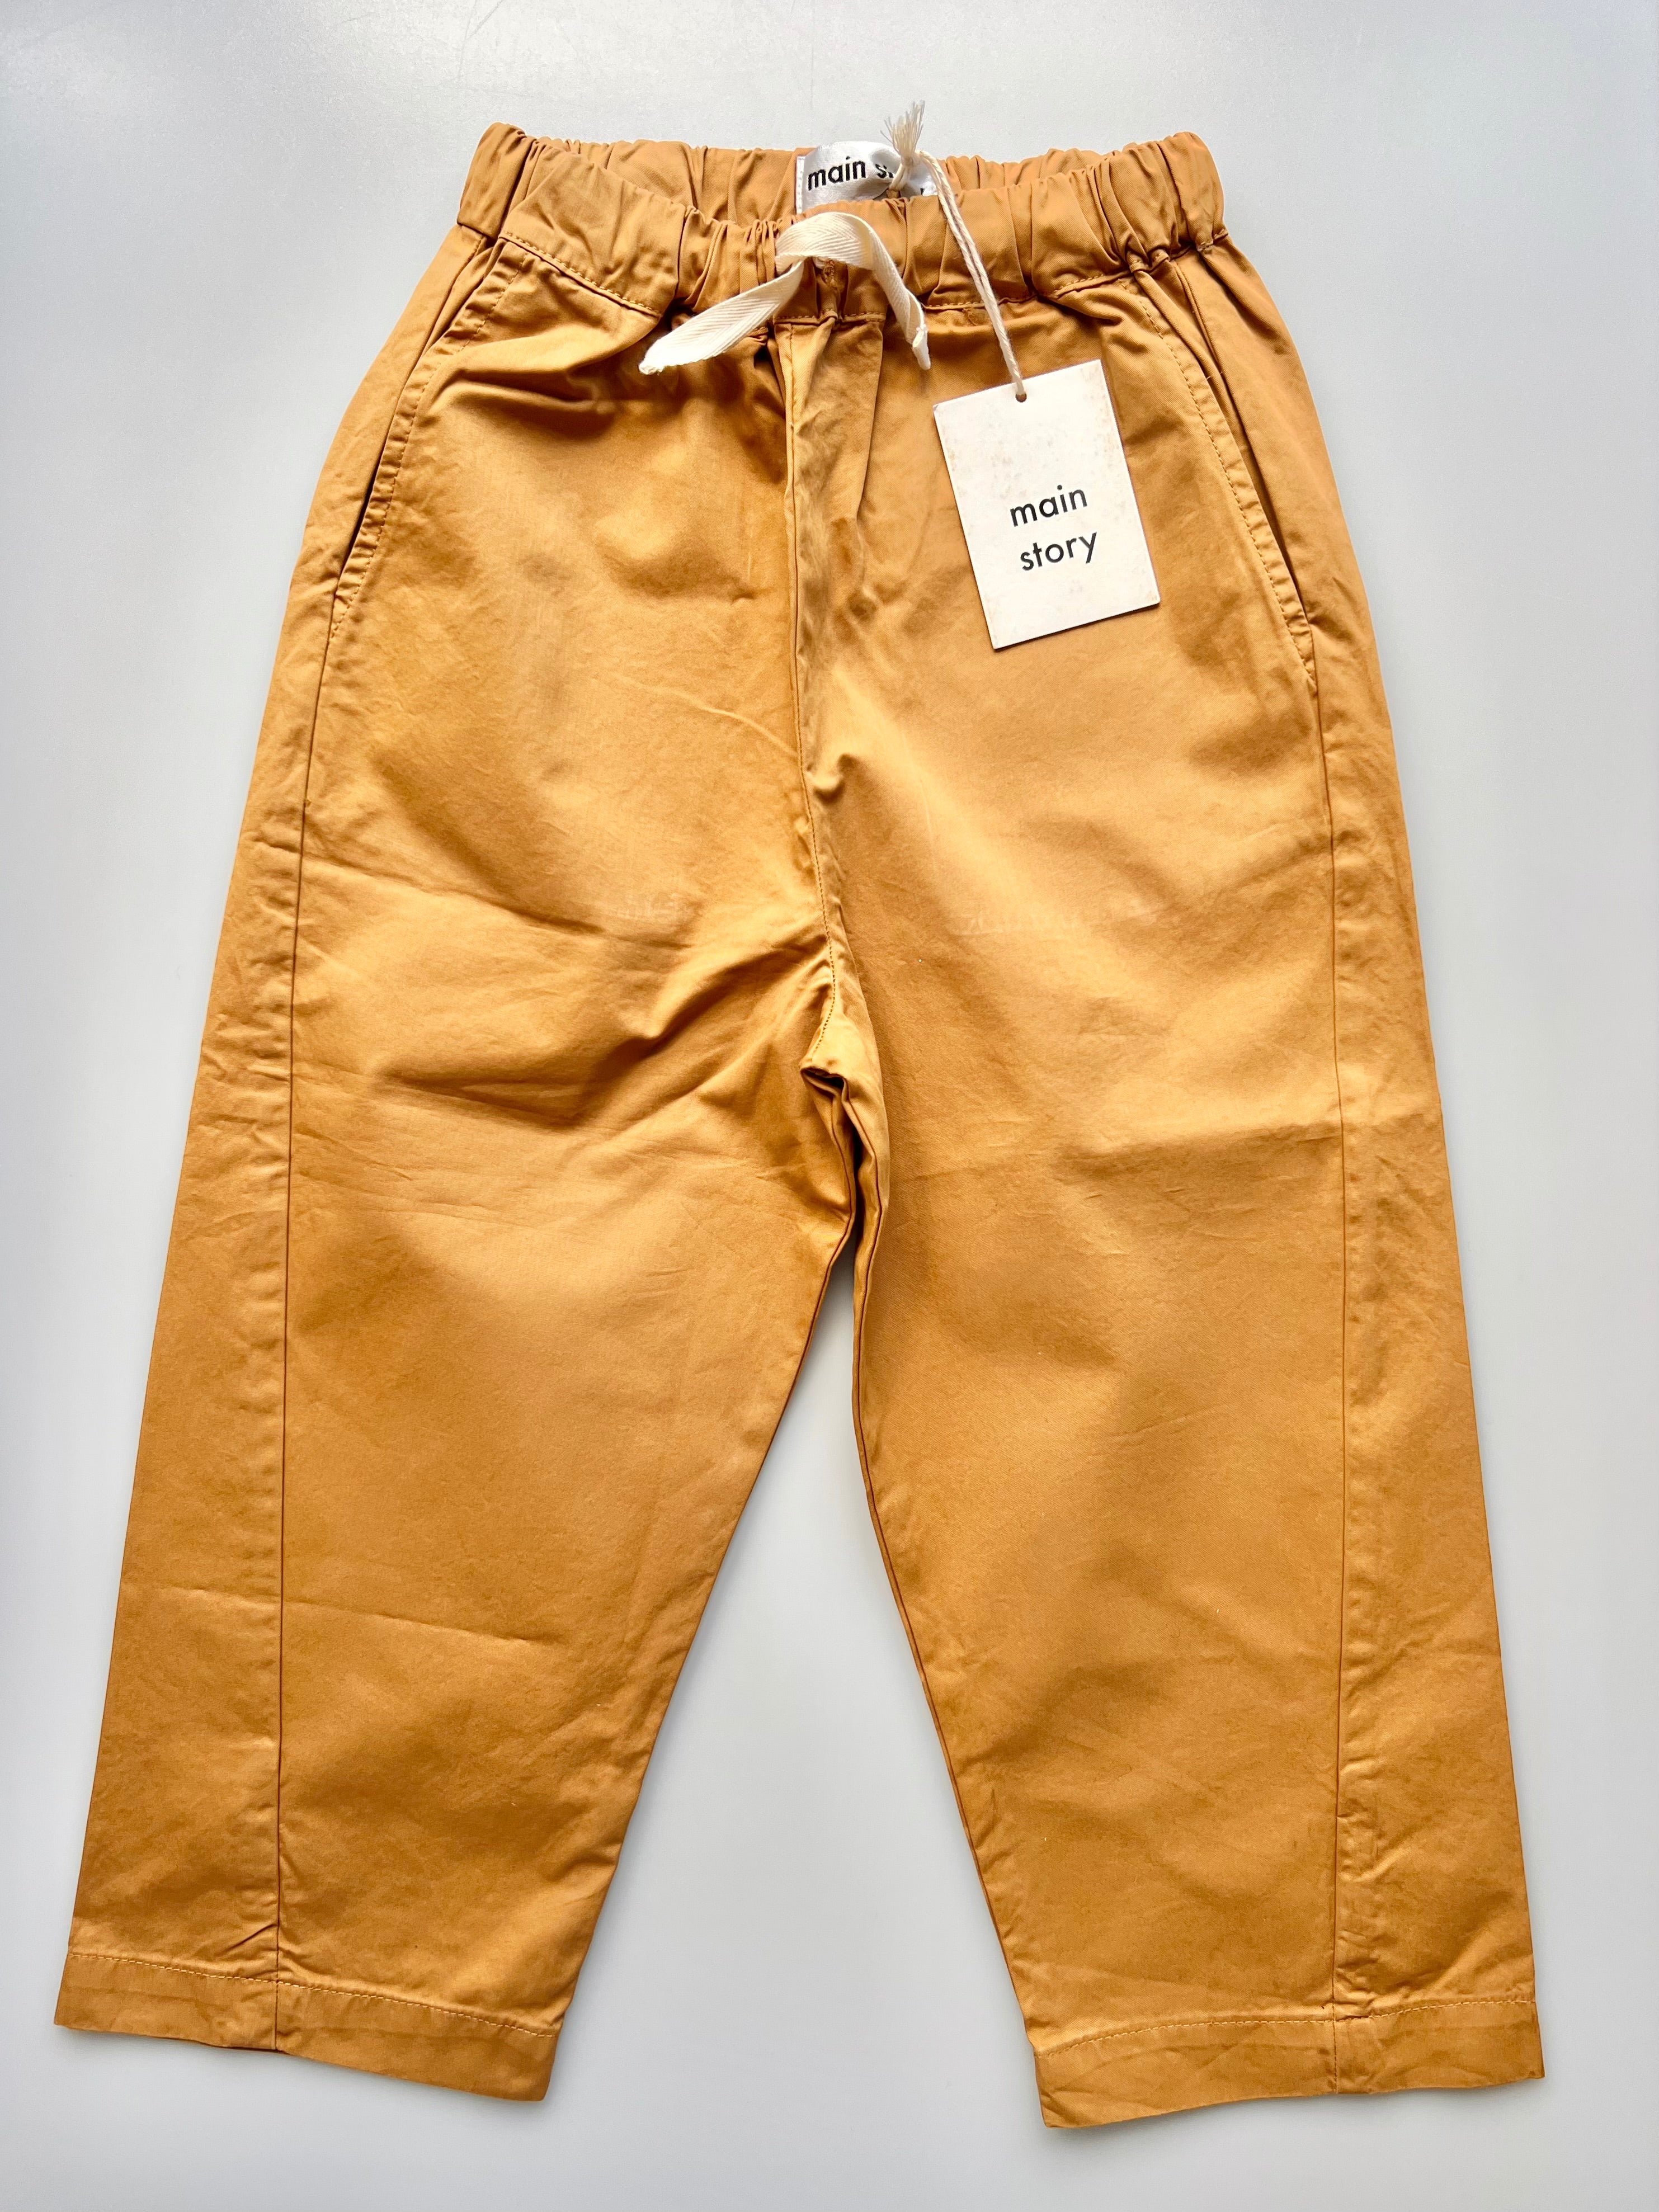 Main Story Tobacco Trousers NEW Age 6-7